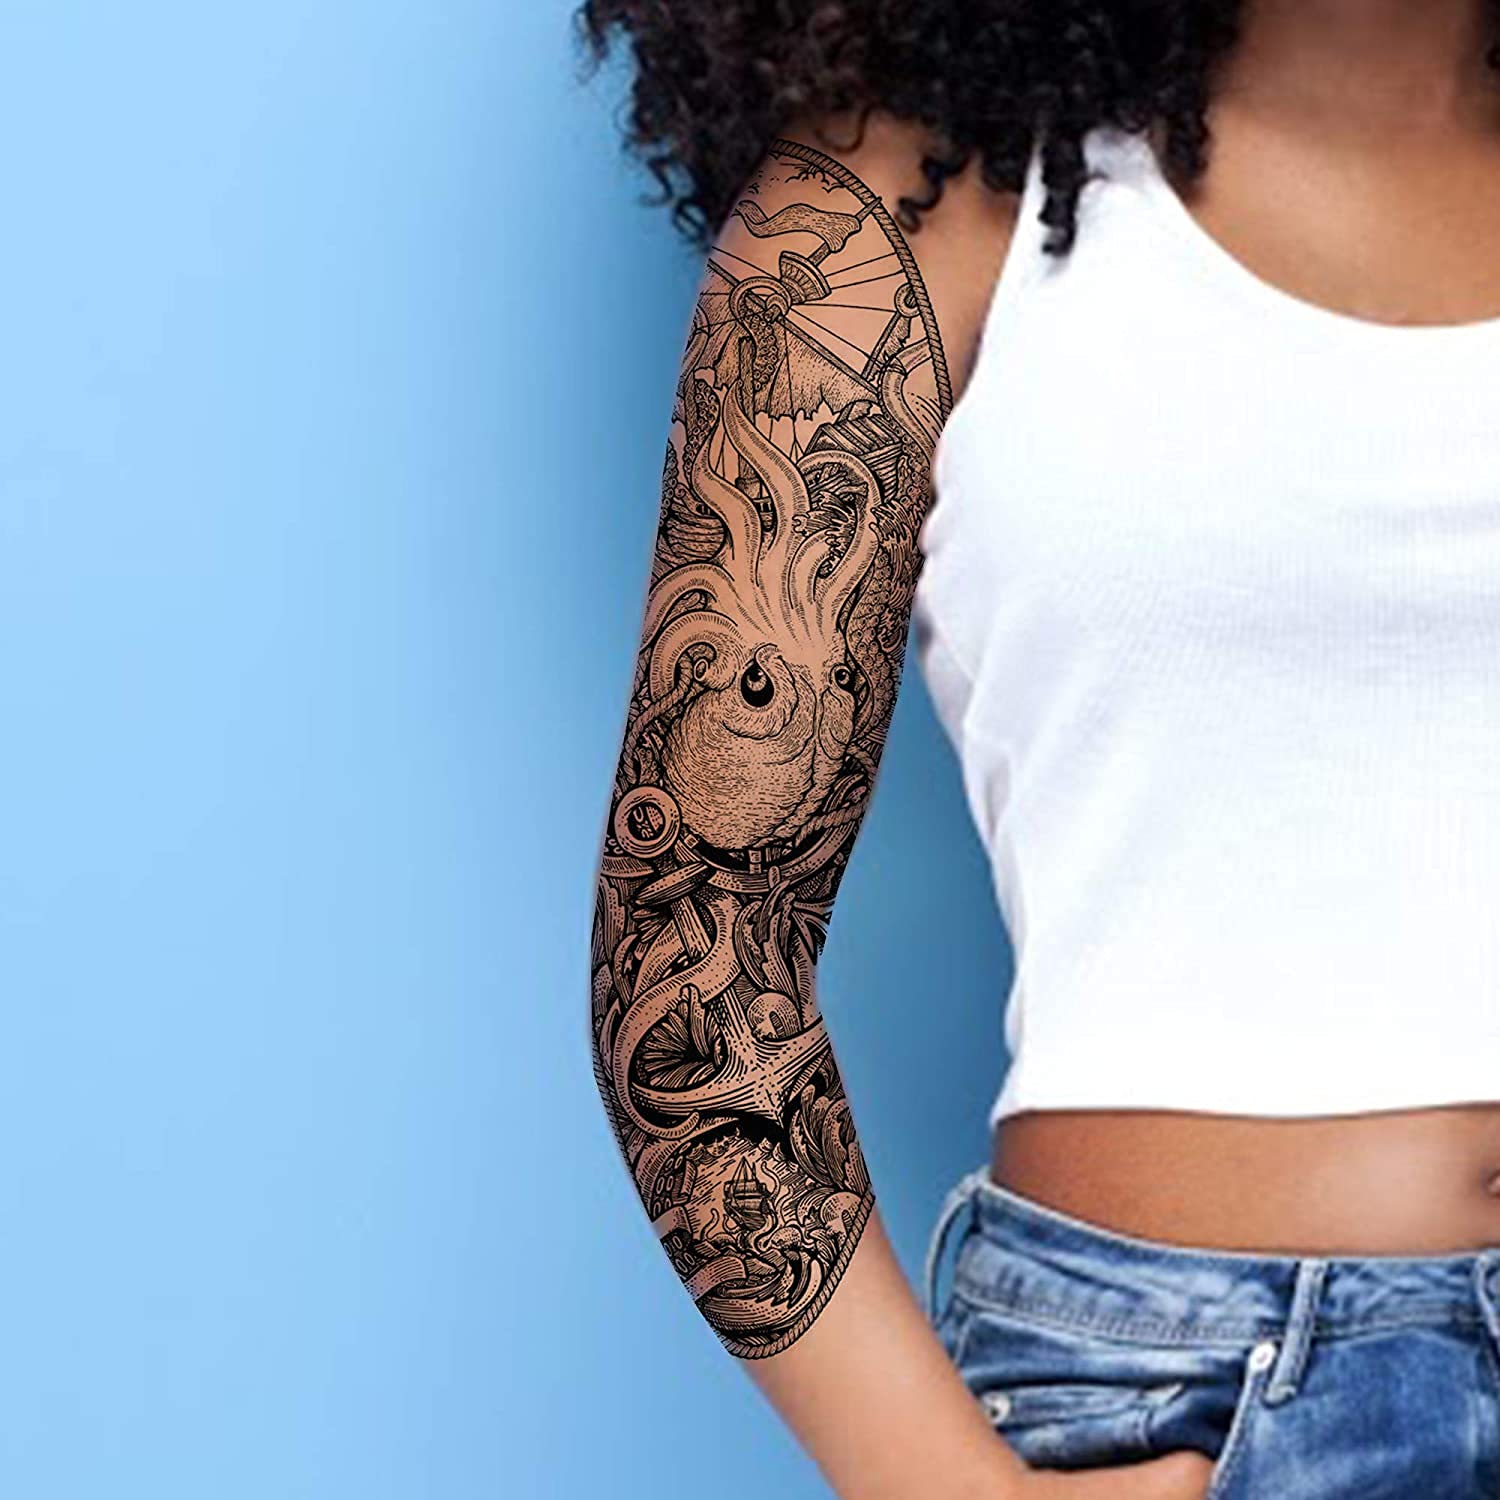 Tatodays 2 x Temporary tattoo full arm caribbean pirate kraken stick on body art transfer for women and men cosplay halloween adult temp tattoo for arms fancy dress